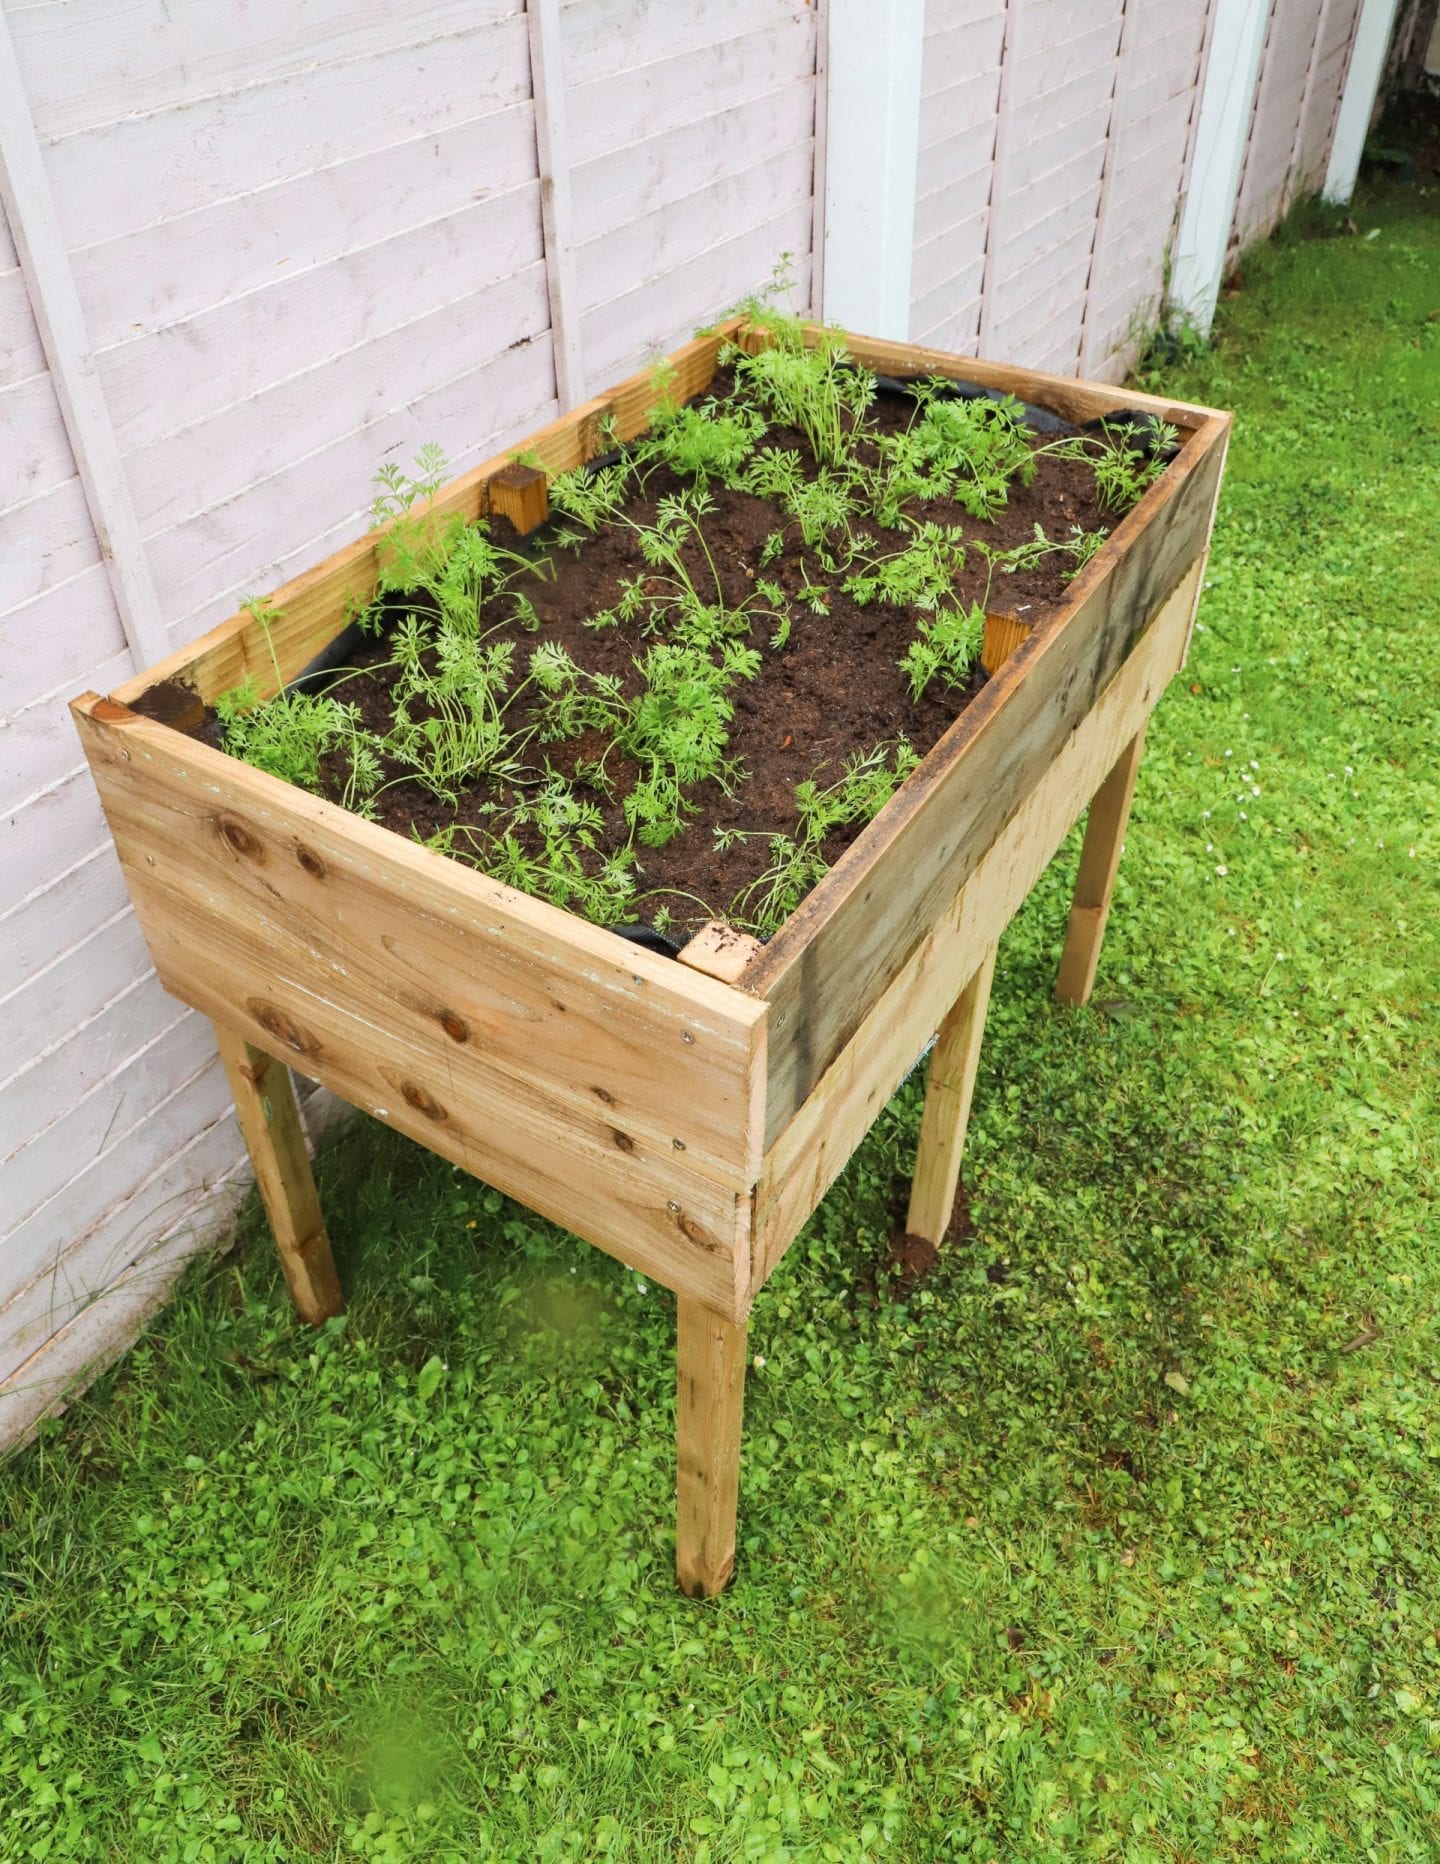 How to make a raised garden bed with legs